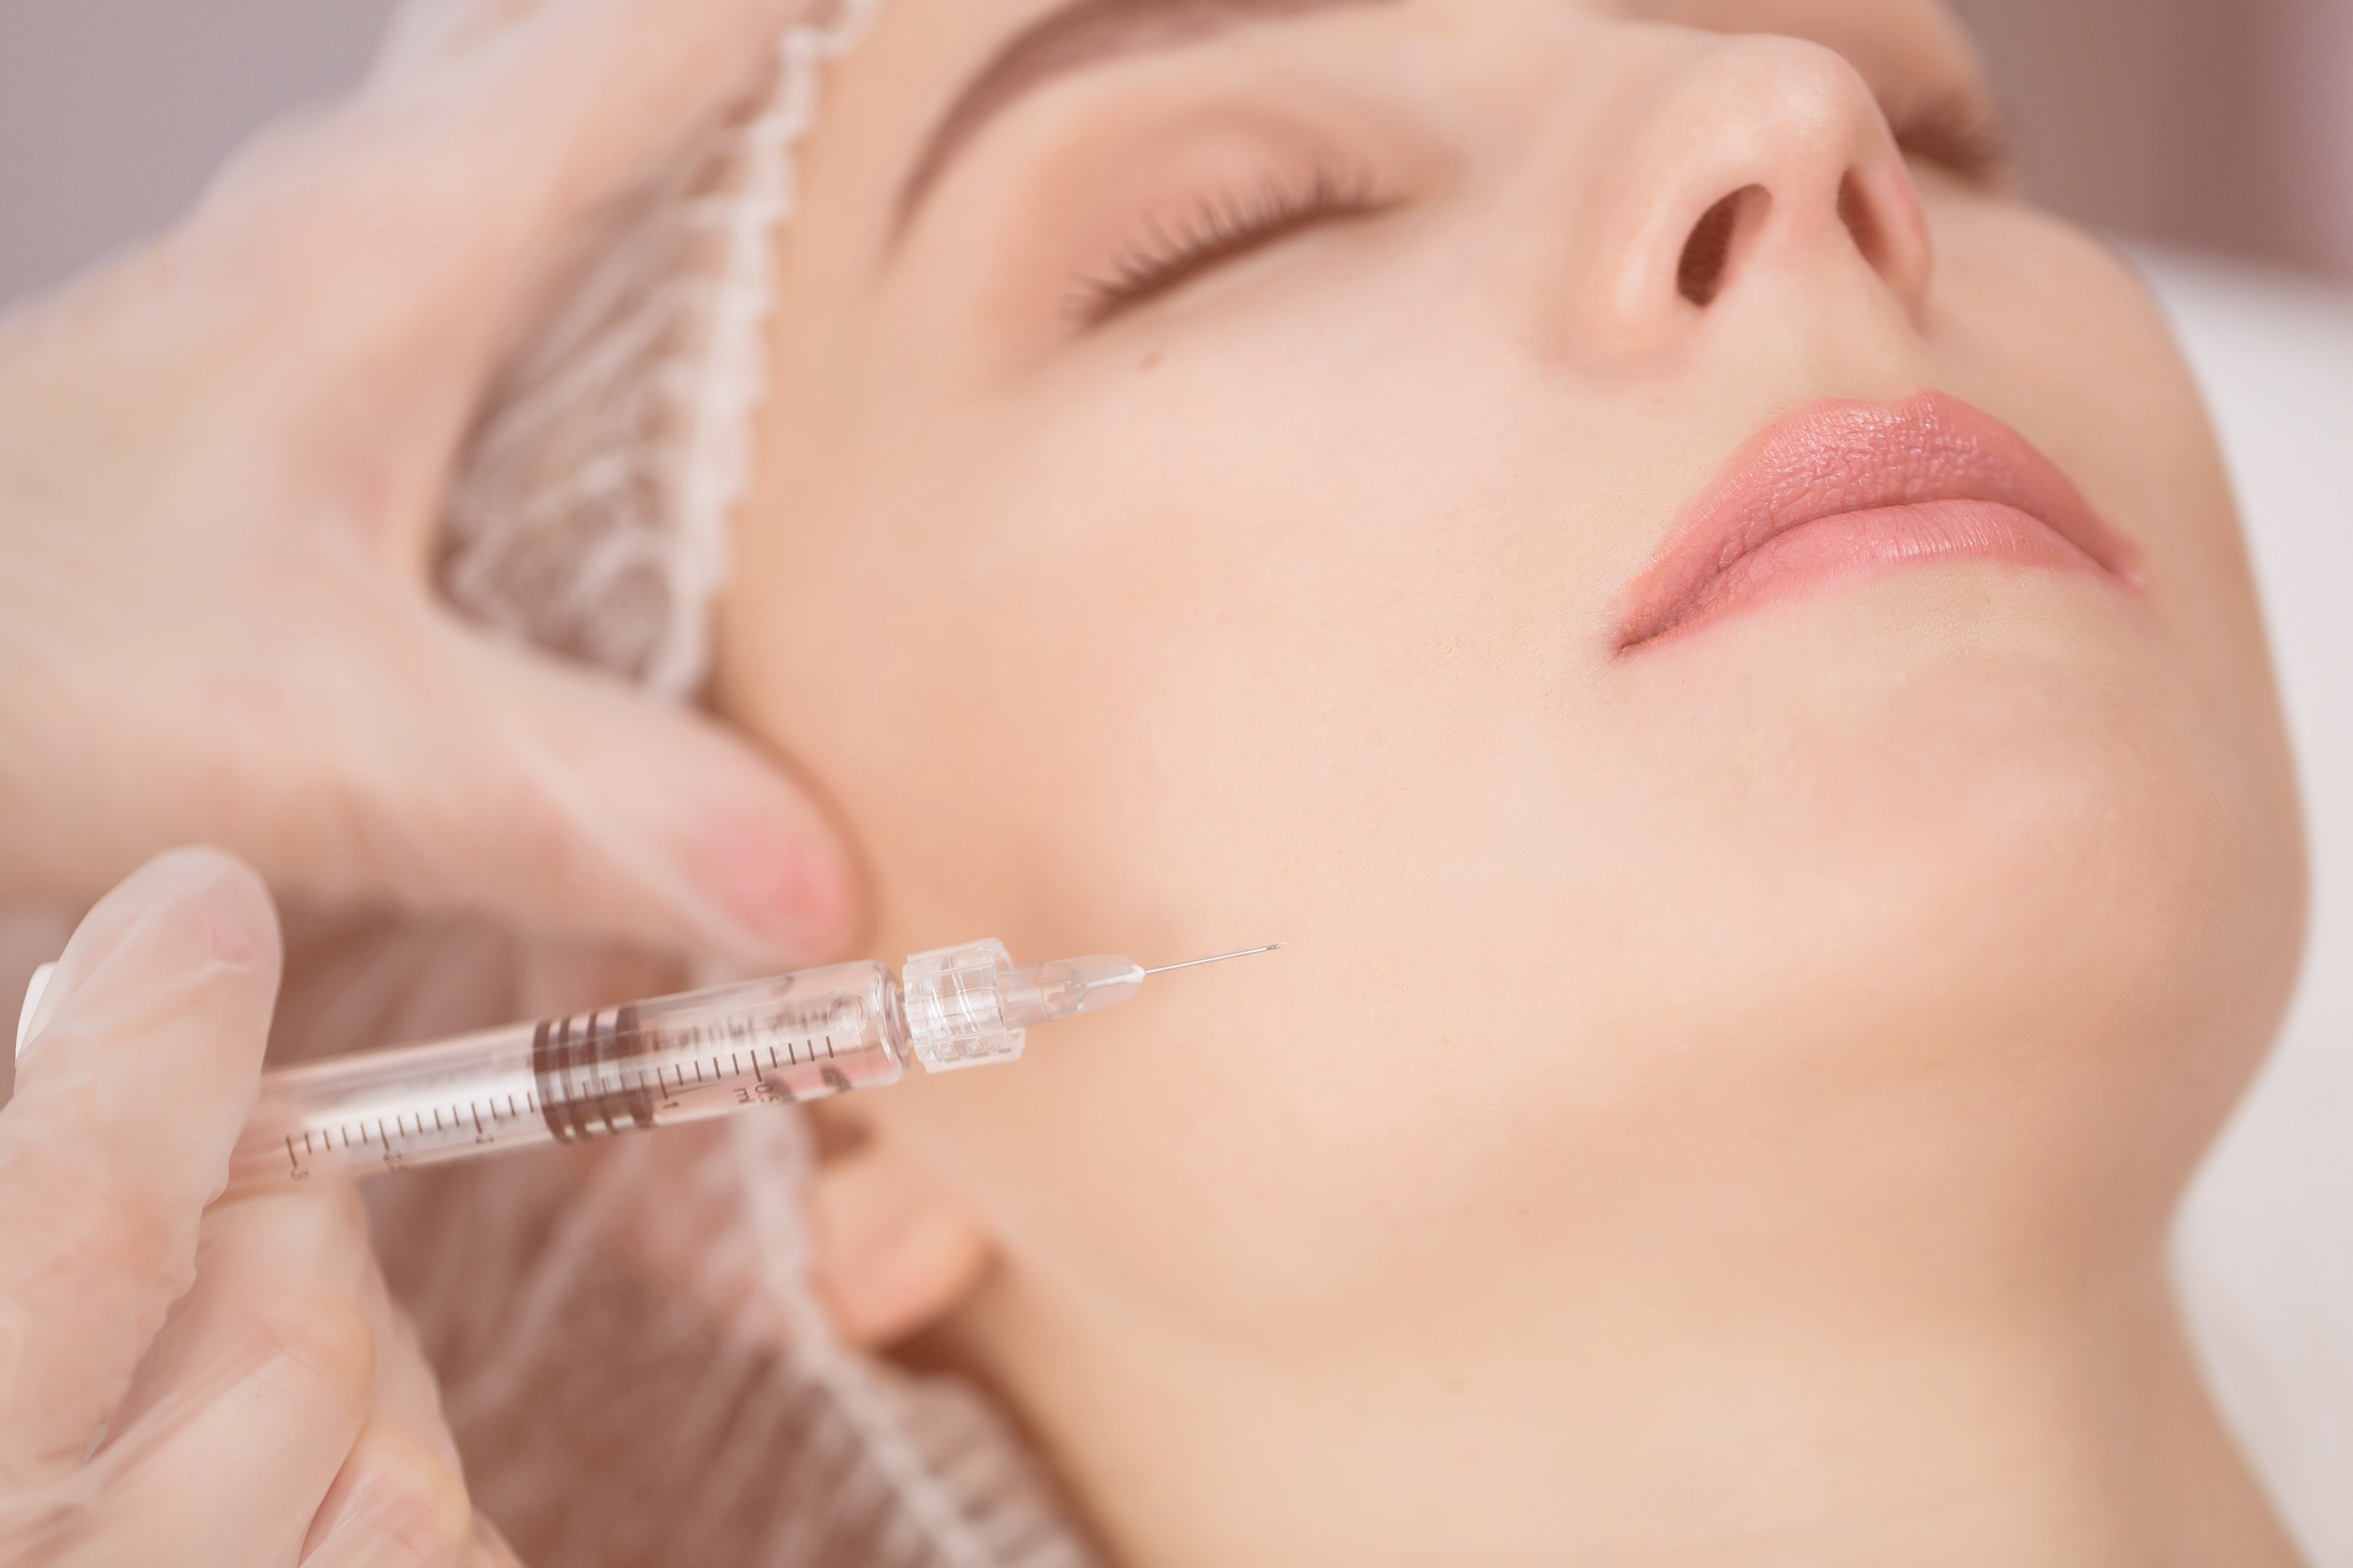 How To Get Botox For Tmj Covered By Insurance